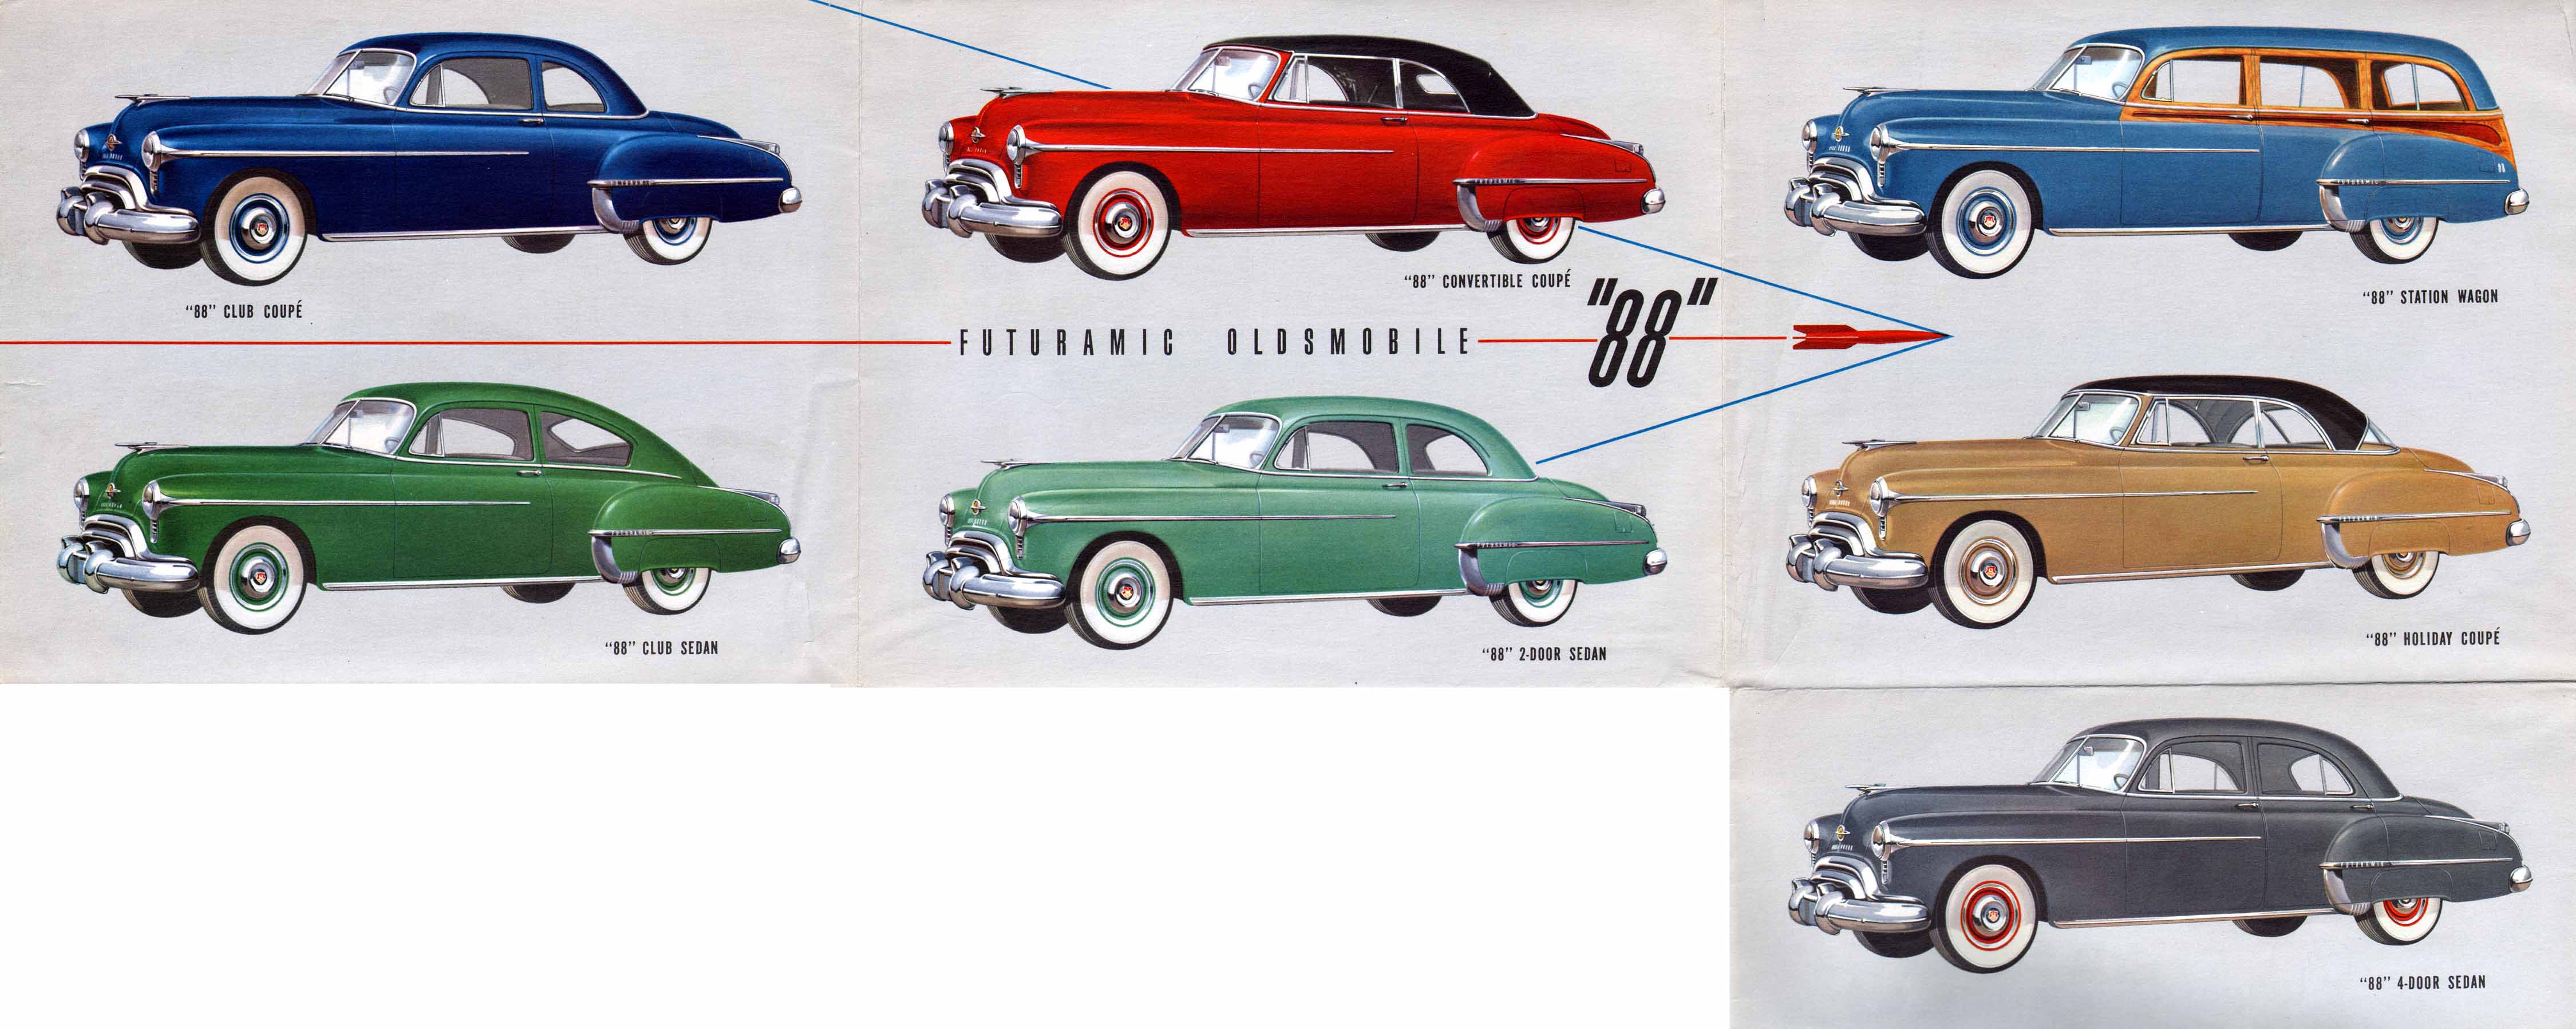 1950 Oldsmobile Motor Cars Foldout Page 7